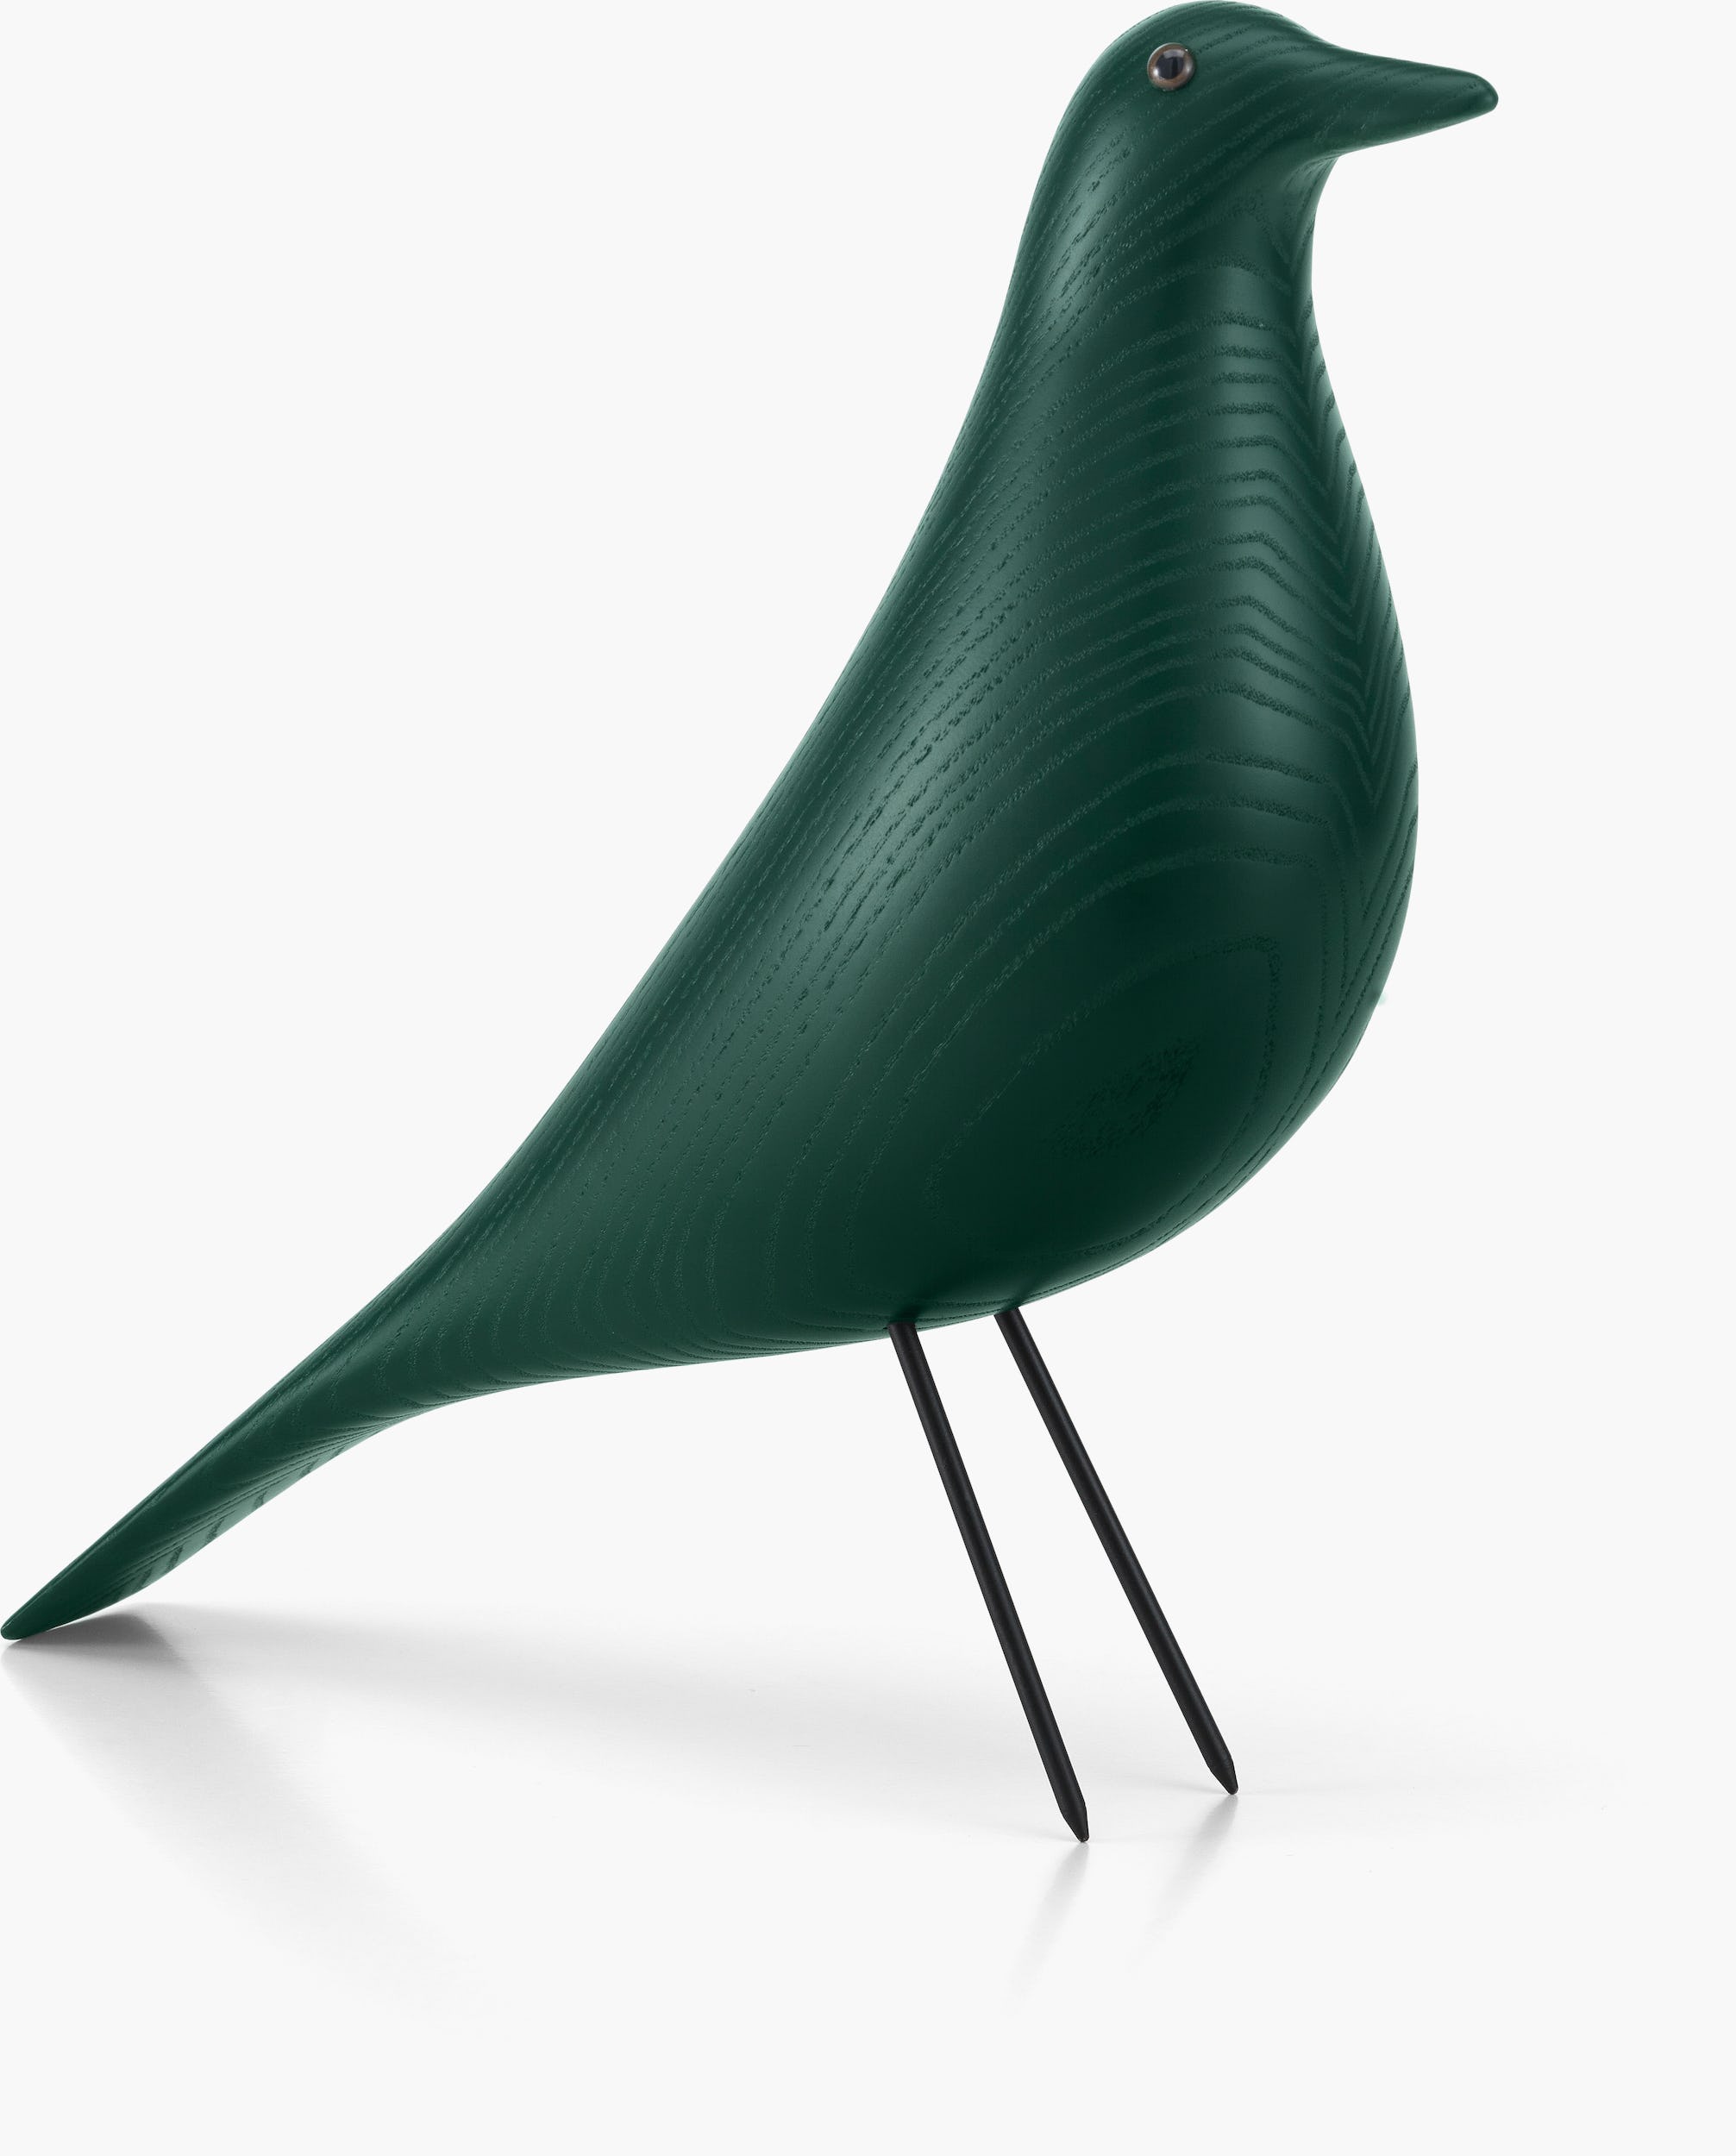 Limited Edition Eames House Bird in Green